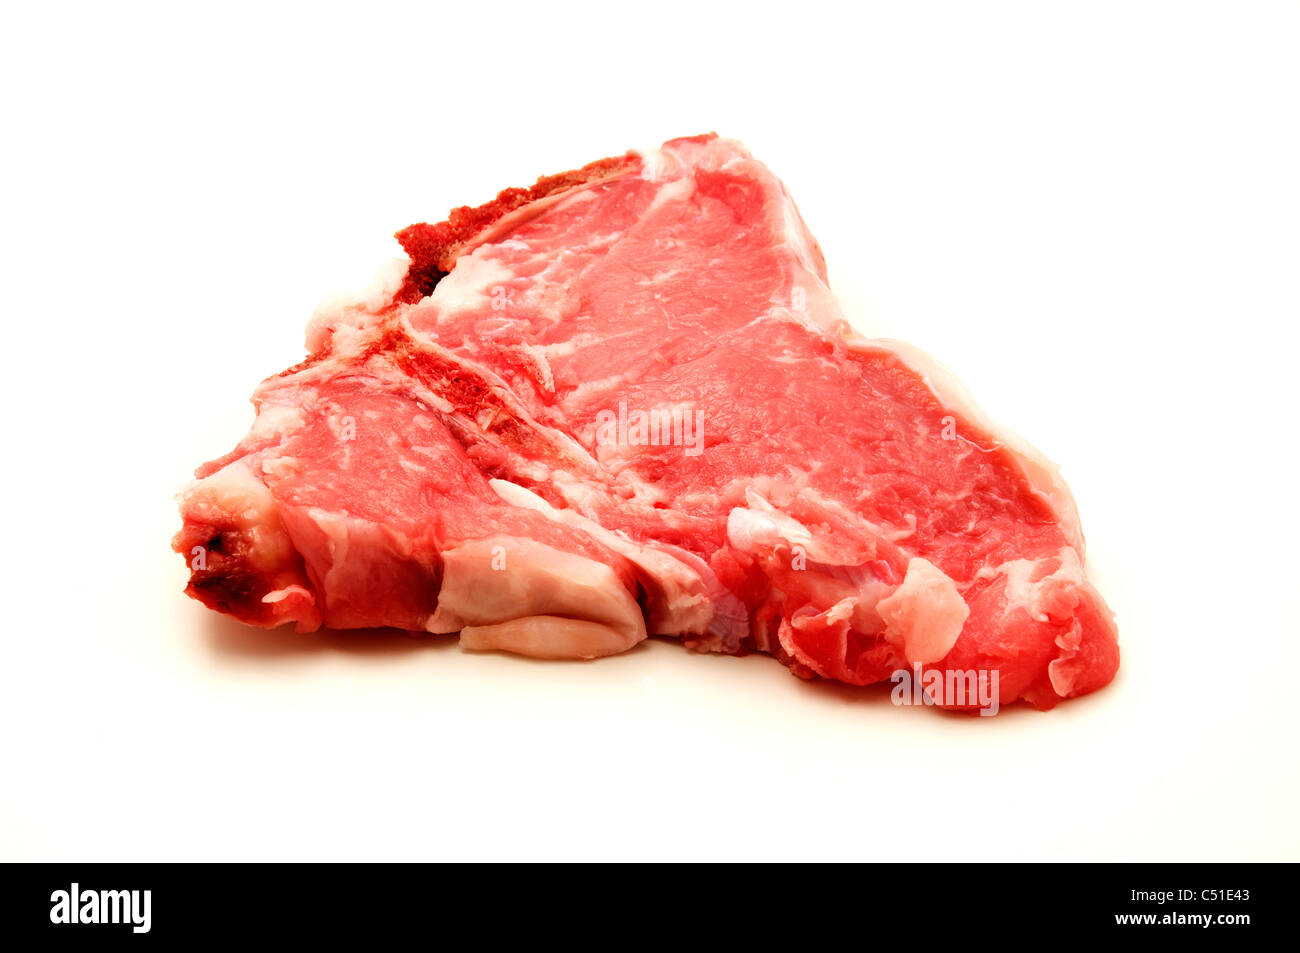 Raw veal loin chop on a white background Stock Photo